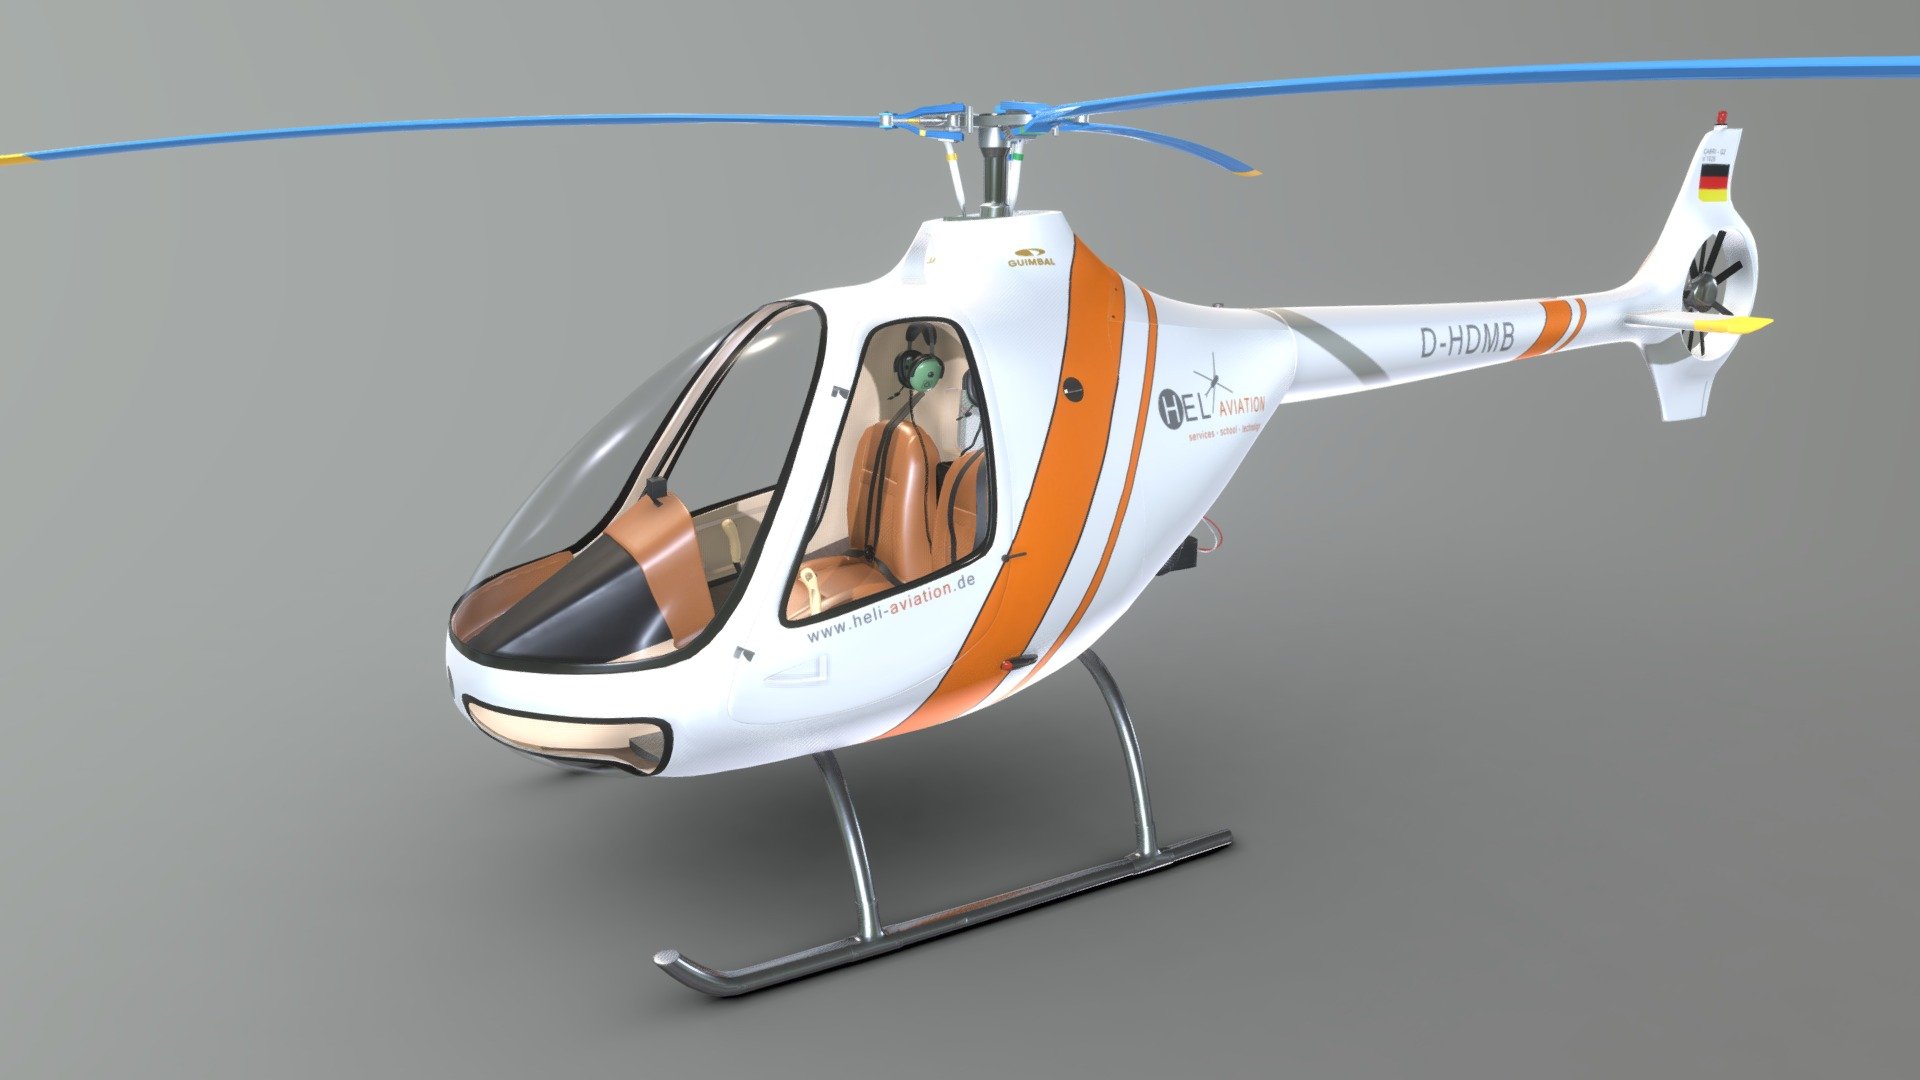 Hello People,
Welcome Back&hellip;

Visit My Store : https://sketchfab.com/leaguestudio

Check the Renders in arnold Render engine : https://www.artstation.com/artwork/9m3mya

Guimbal Cabri G-2 is a german helicopter(Government Property) used for reaserch,training and study purpose.Modelling done in maya,textured in substance painter....

4K Textures,Photo Realistic,Game Ready,Vfx Asset&hellip; - Guimbal Cabri G-2(D-HDMB) German Helicopter - Buy Royalty Free 3D model by League Studio (@leaguestudio) 3d model